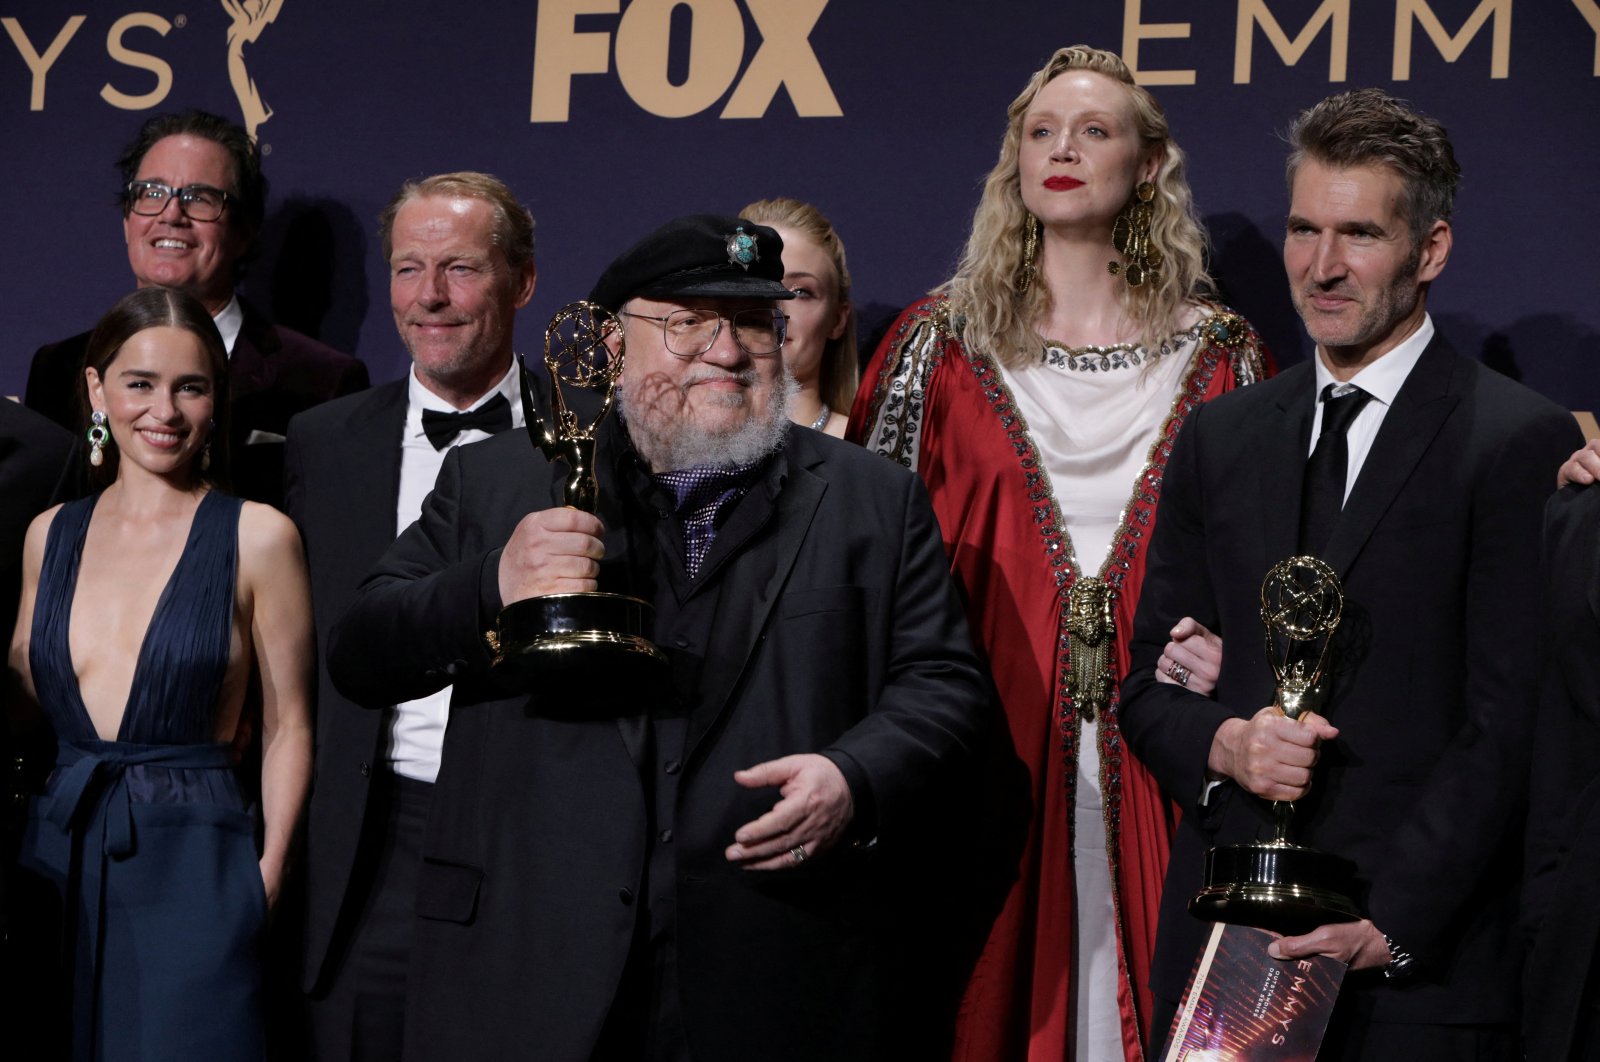 George R.R. Martin (C) and the cast and crew of Game of Thrones poses with their award, at 71st Primetime Emmy Awards, in Los Angeles, California, U.S., Sept. 22, 2019. (Reuters Photo)